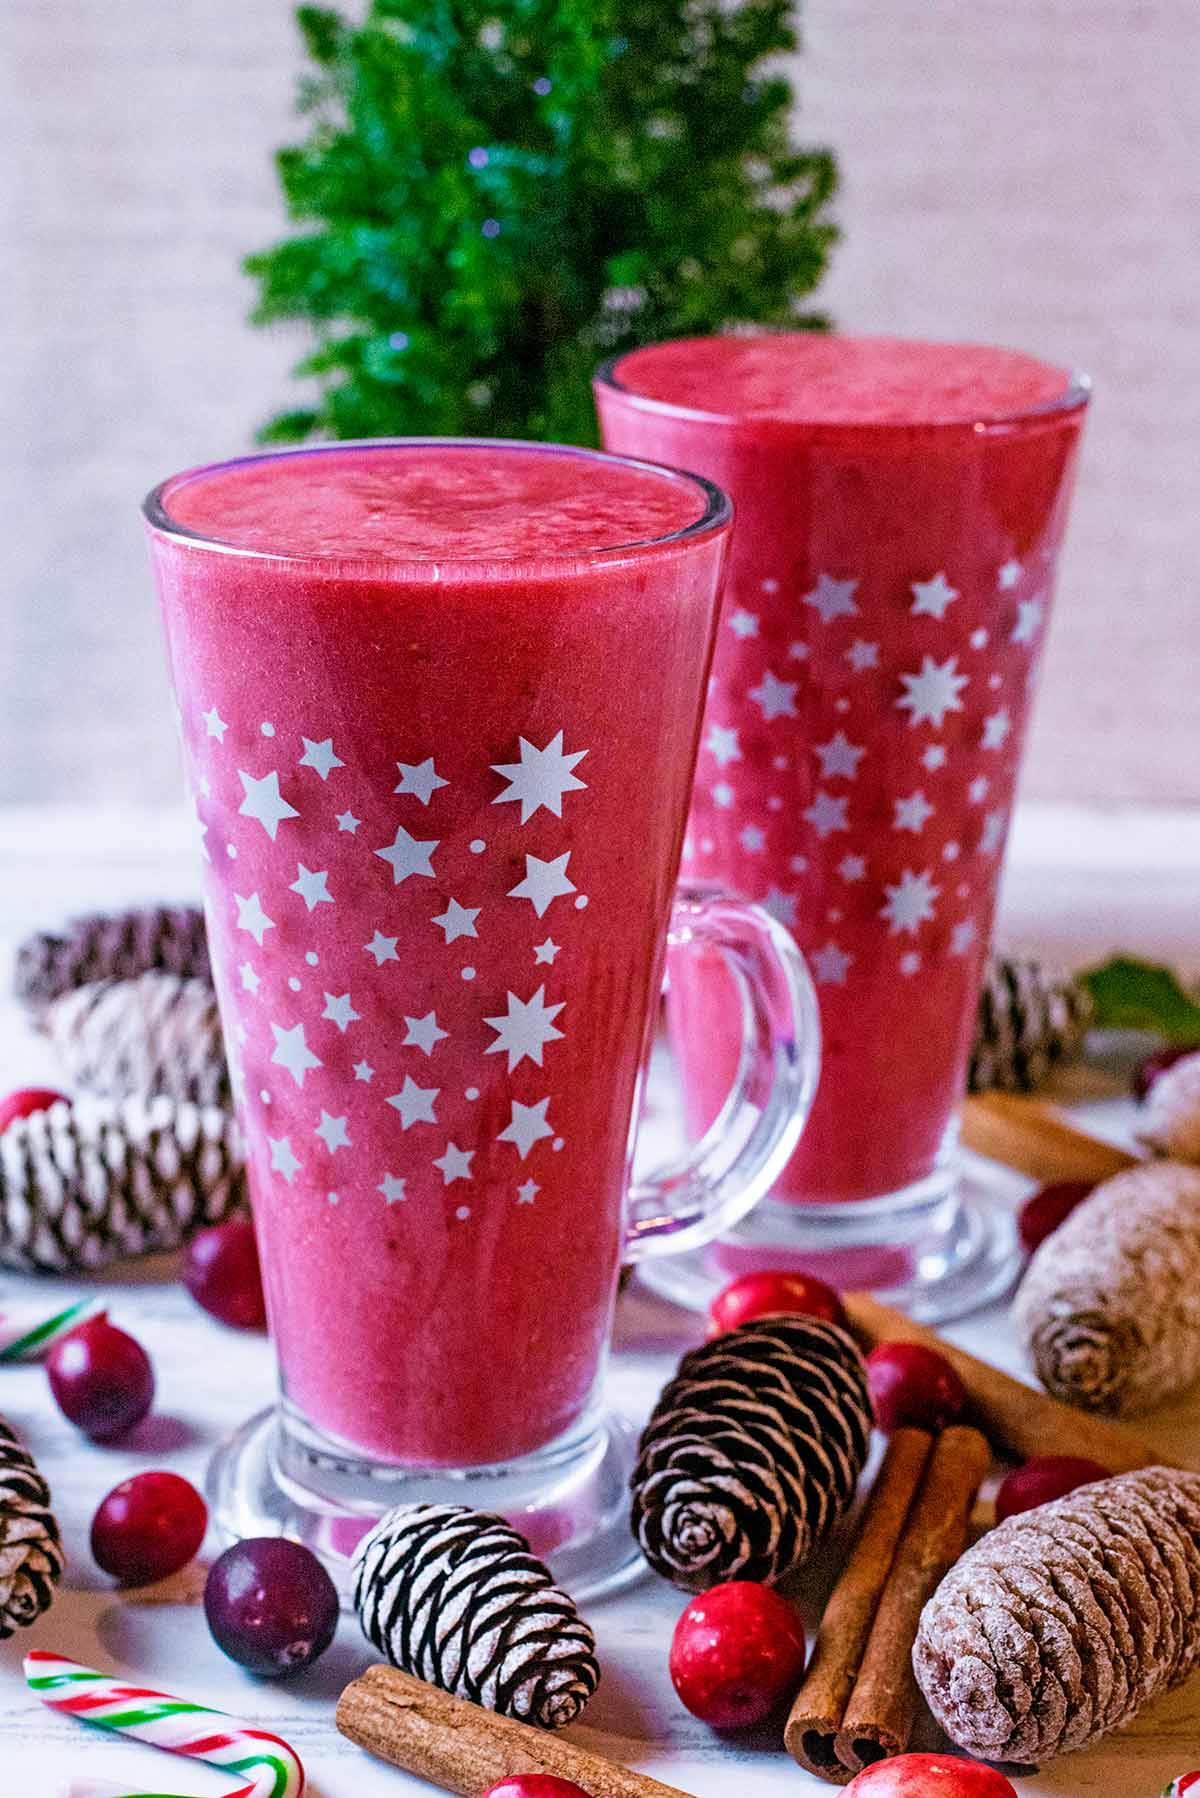 Tall Christmas glasses filled with cranberry smoothie.